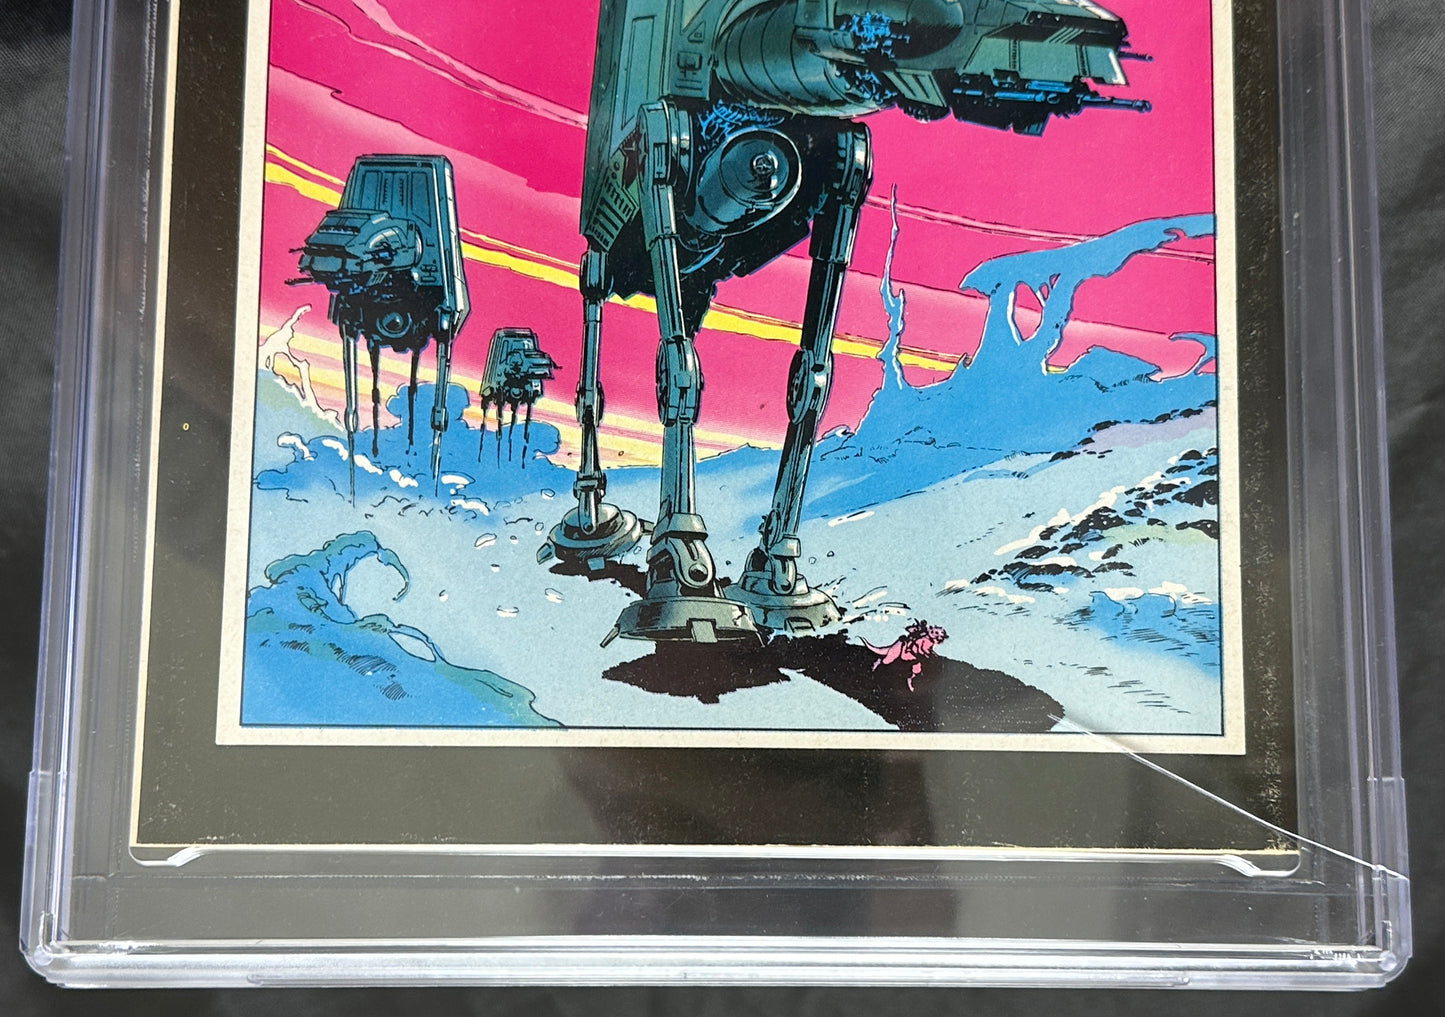 
                  
                    Marvel Super Special #16 - Star Wars: The Empire Strikes Back Comics Adaptation - Signed by Harrison Ford, Mark Hamill, Carrie Fisher, Billy Dee Williams, Peter Mayhew, Kenny Baker, Anthony Daniels, & Dave Prowse (CGC Signature Series 9.4) 1980
                  
                